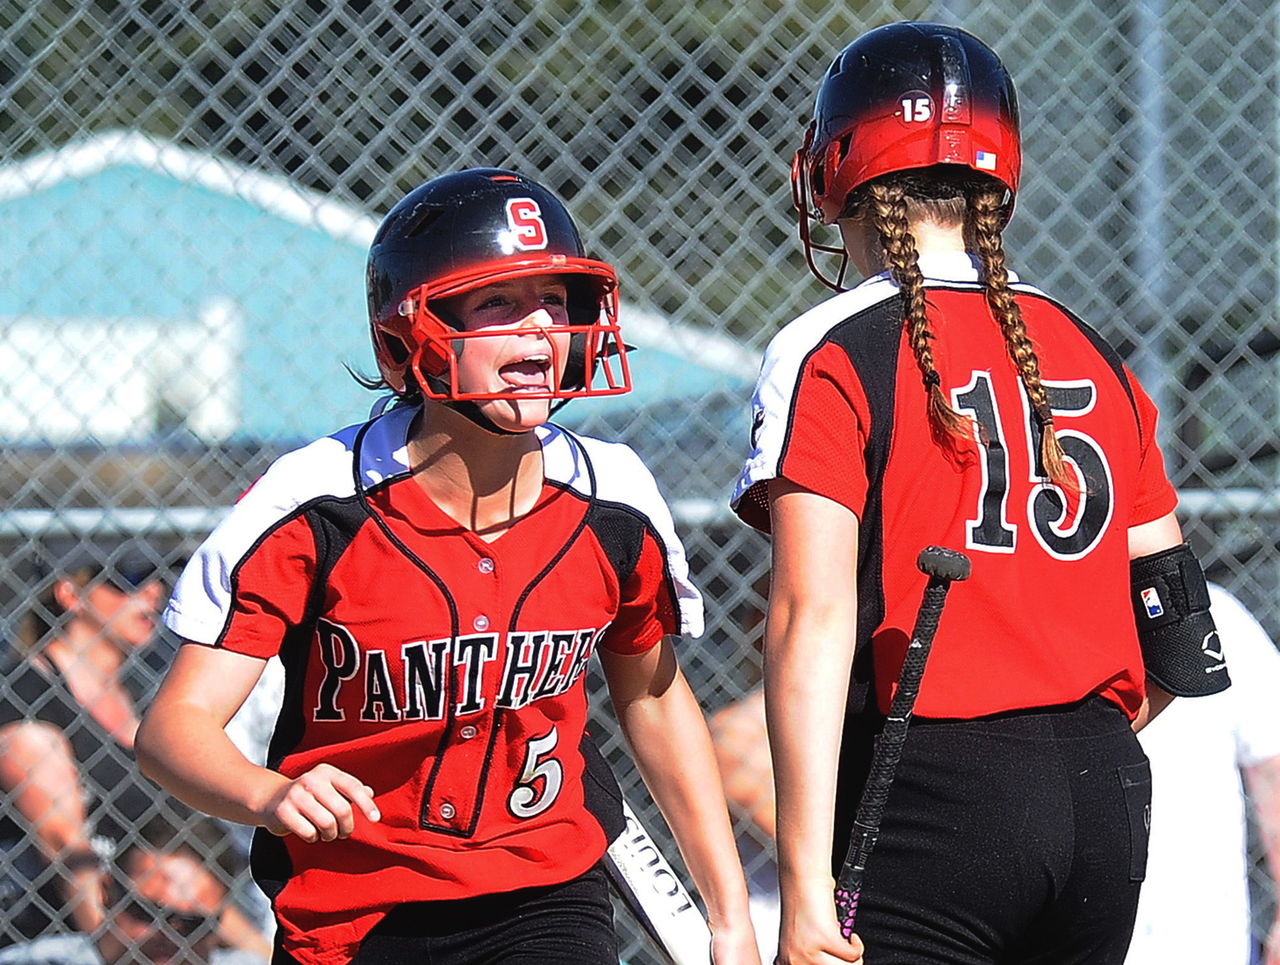 Snohomish’s Sami Reynolds (left) celebrates with teammate Rylie Wales after Reynolds’ scored one of Snohomish’s four runs in a 4-0 in over Jackson on May 10 at Snohomish High School.